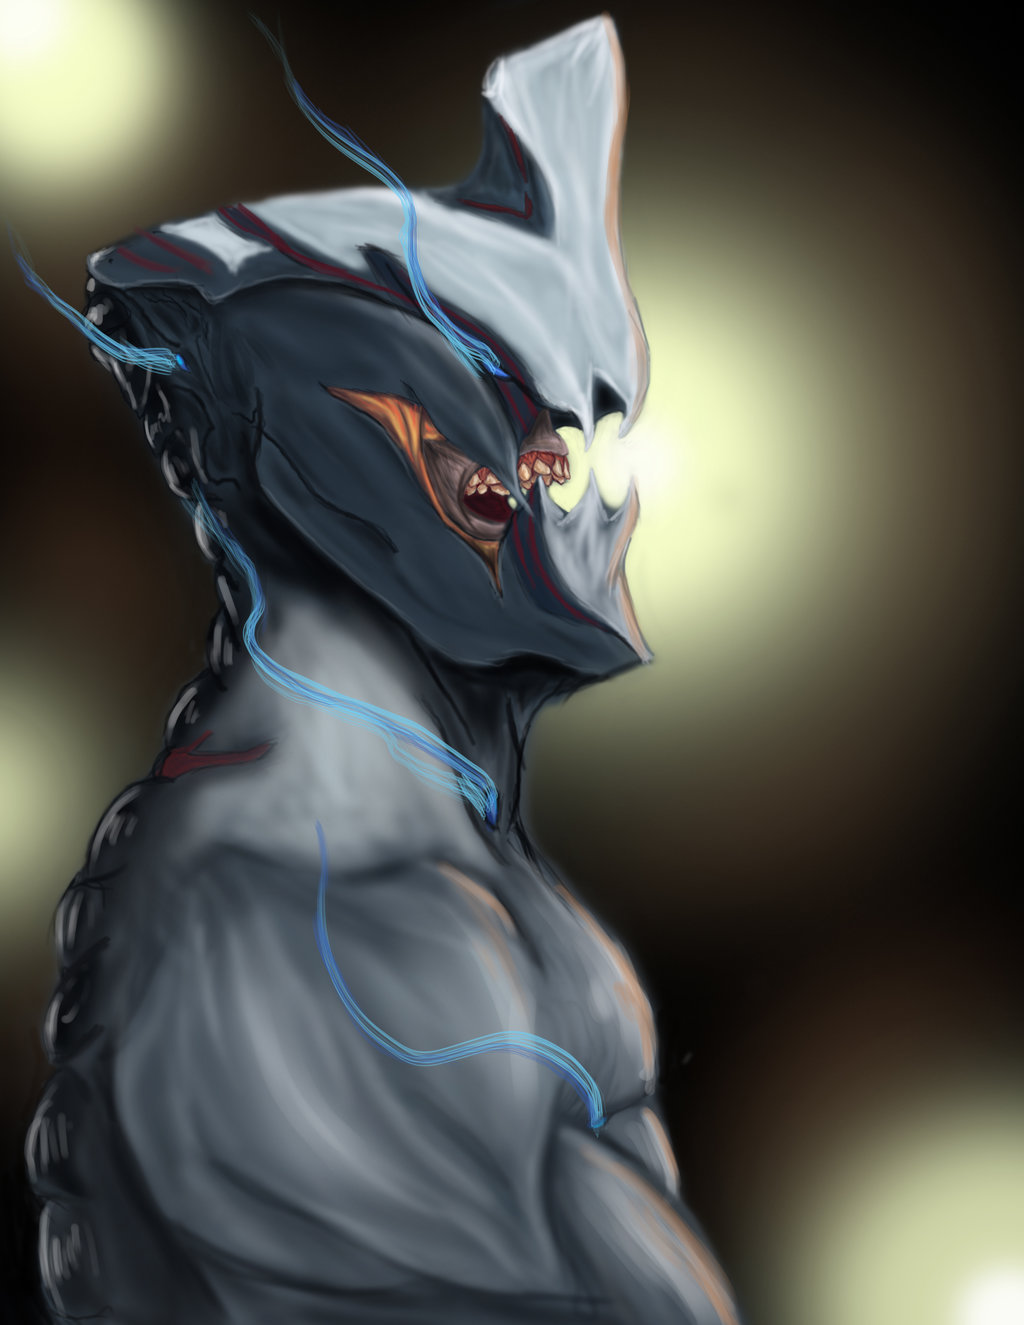 Warframe Infested Excalibur by WTFzerg on